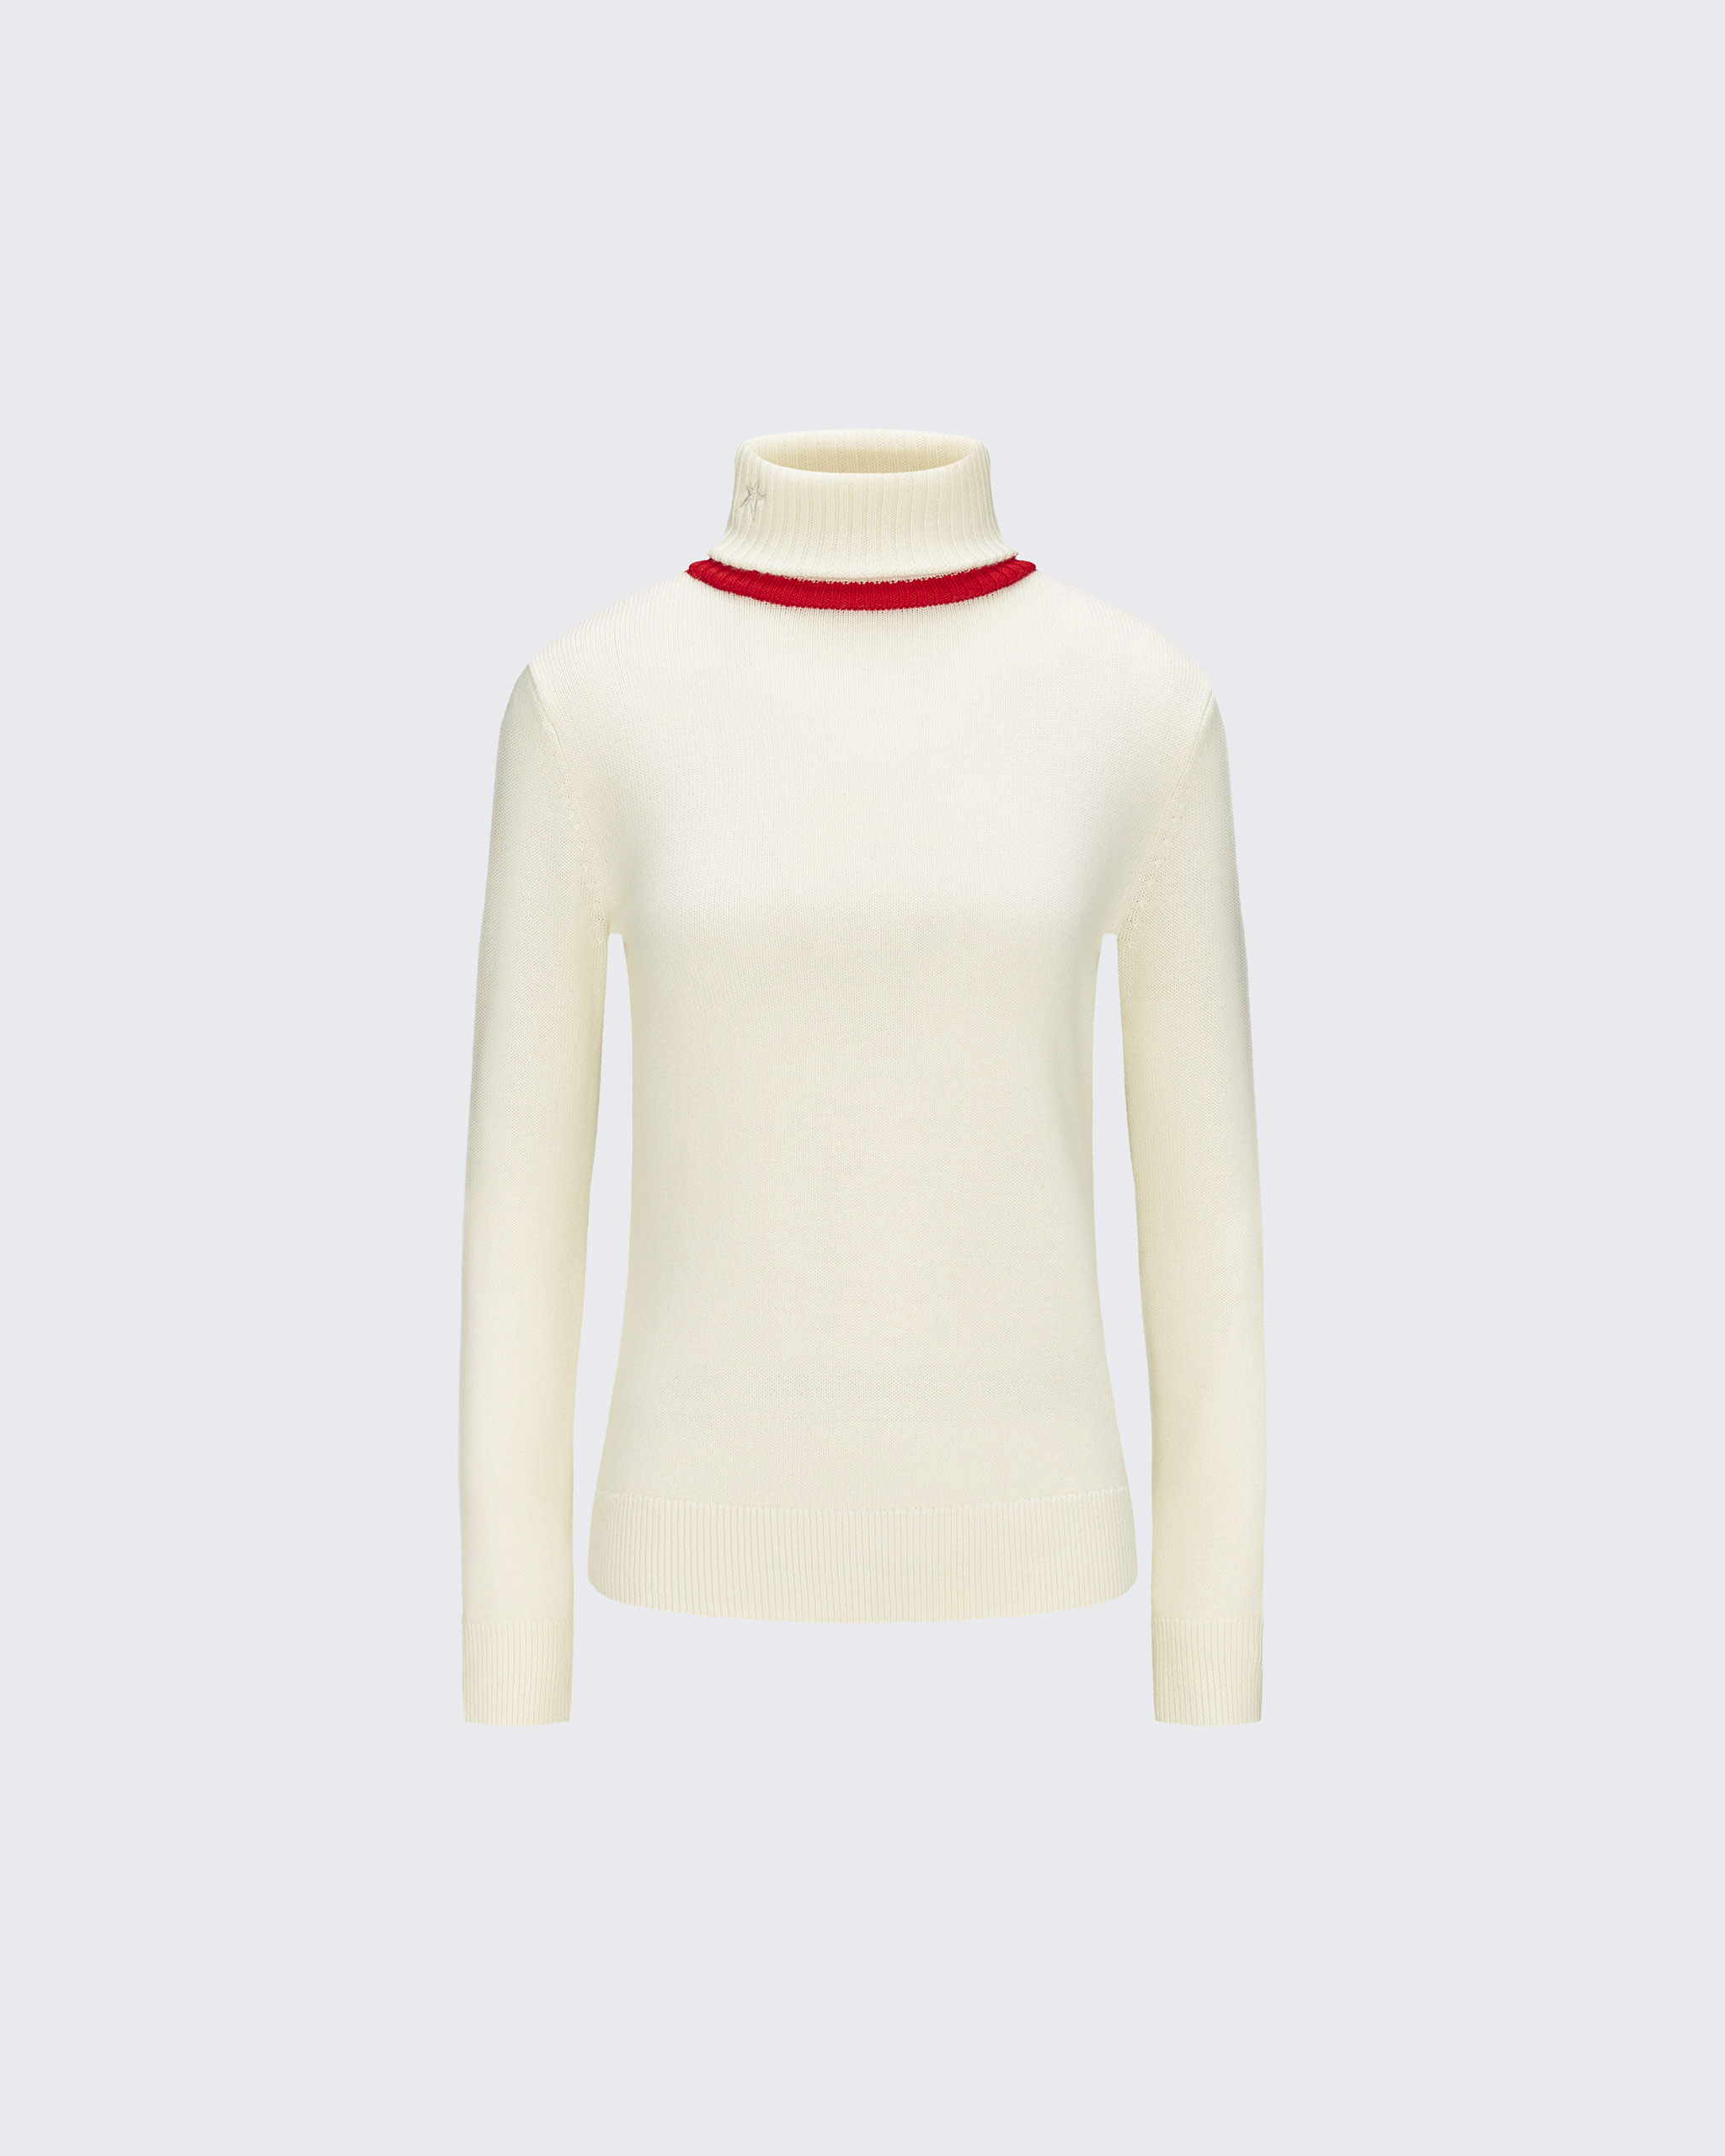 Perfect Moment Merino Wool Turtleneck Sweater L In Snow-white